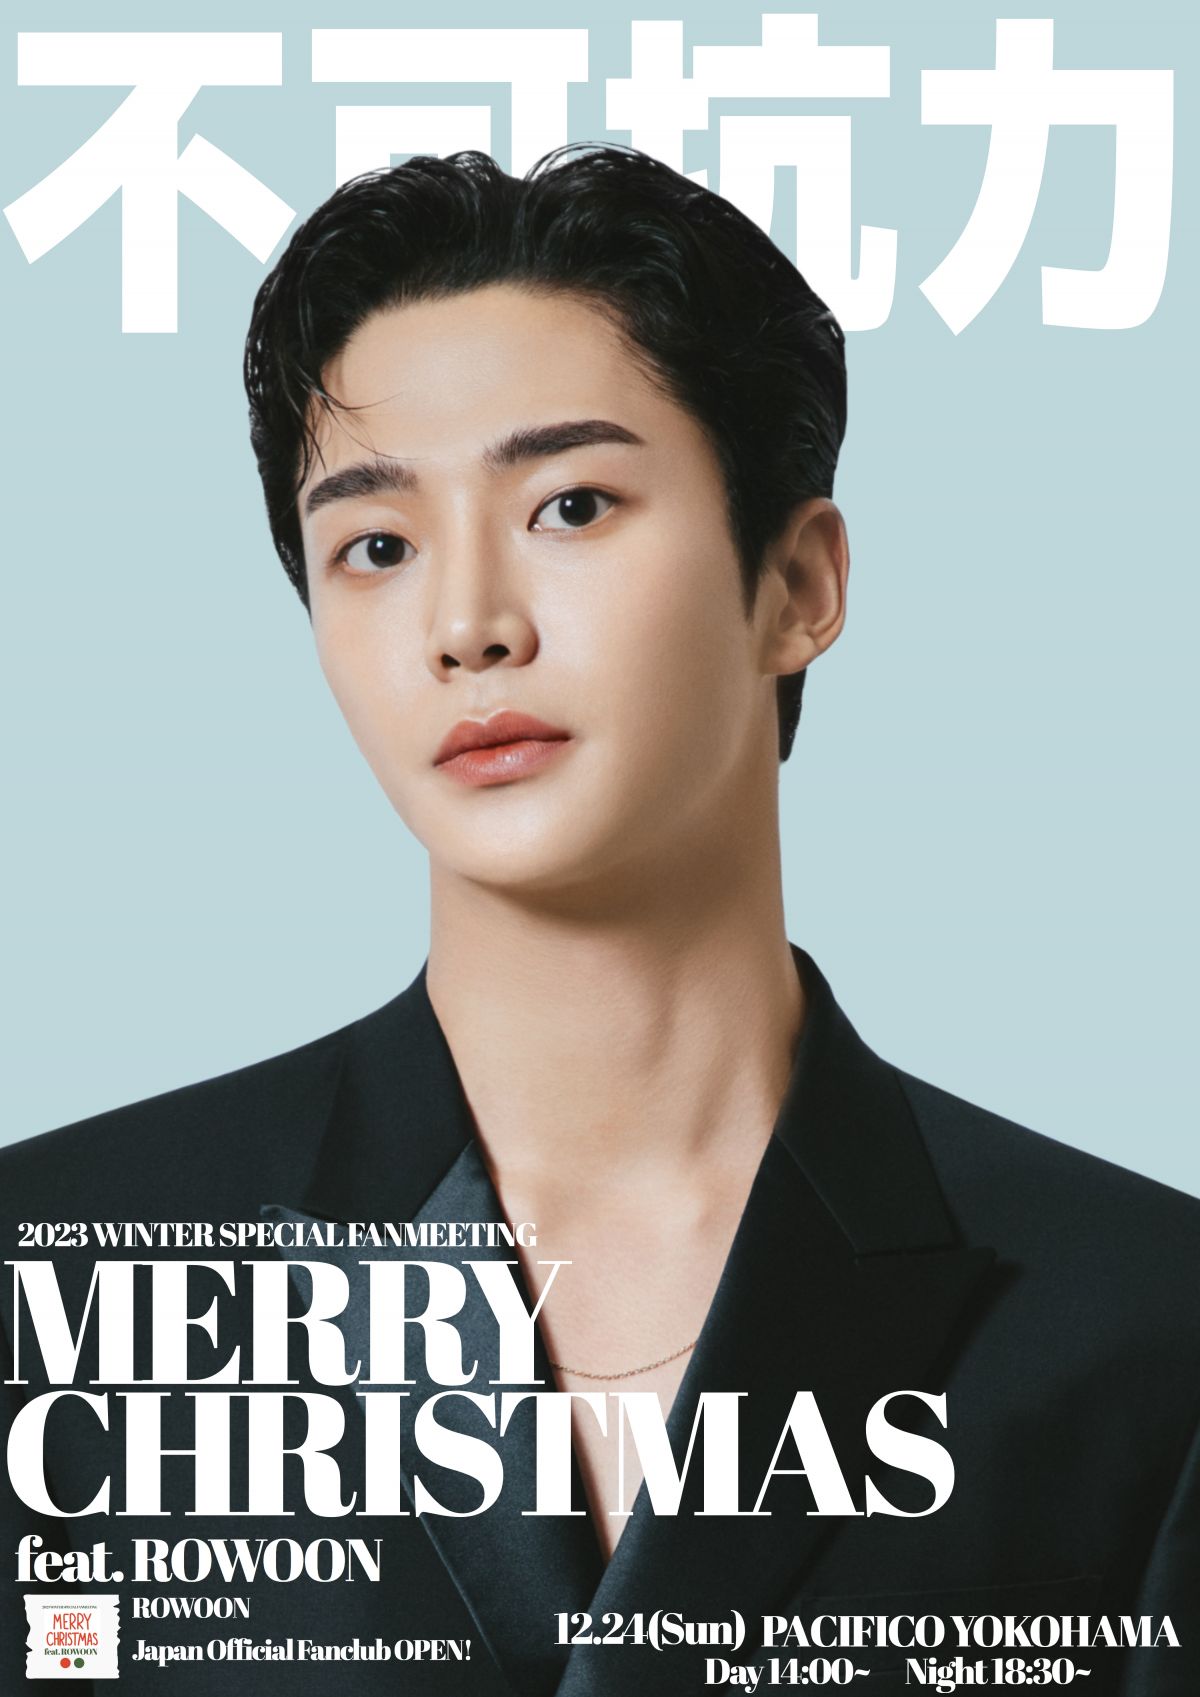 2023 WINTER SPECIAL FANMEETING - MERRY CHRISTMAS feat.ROWOON - [昼]